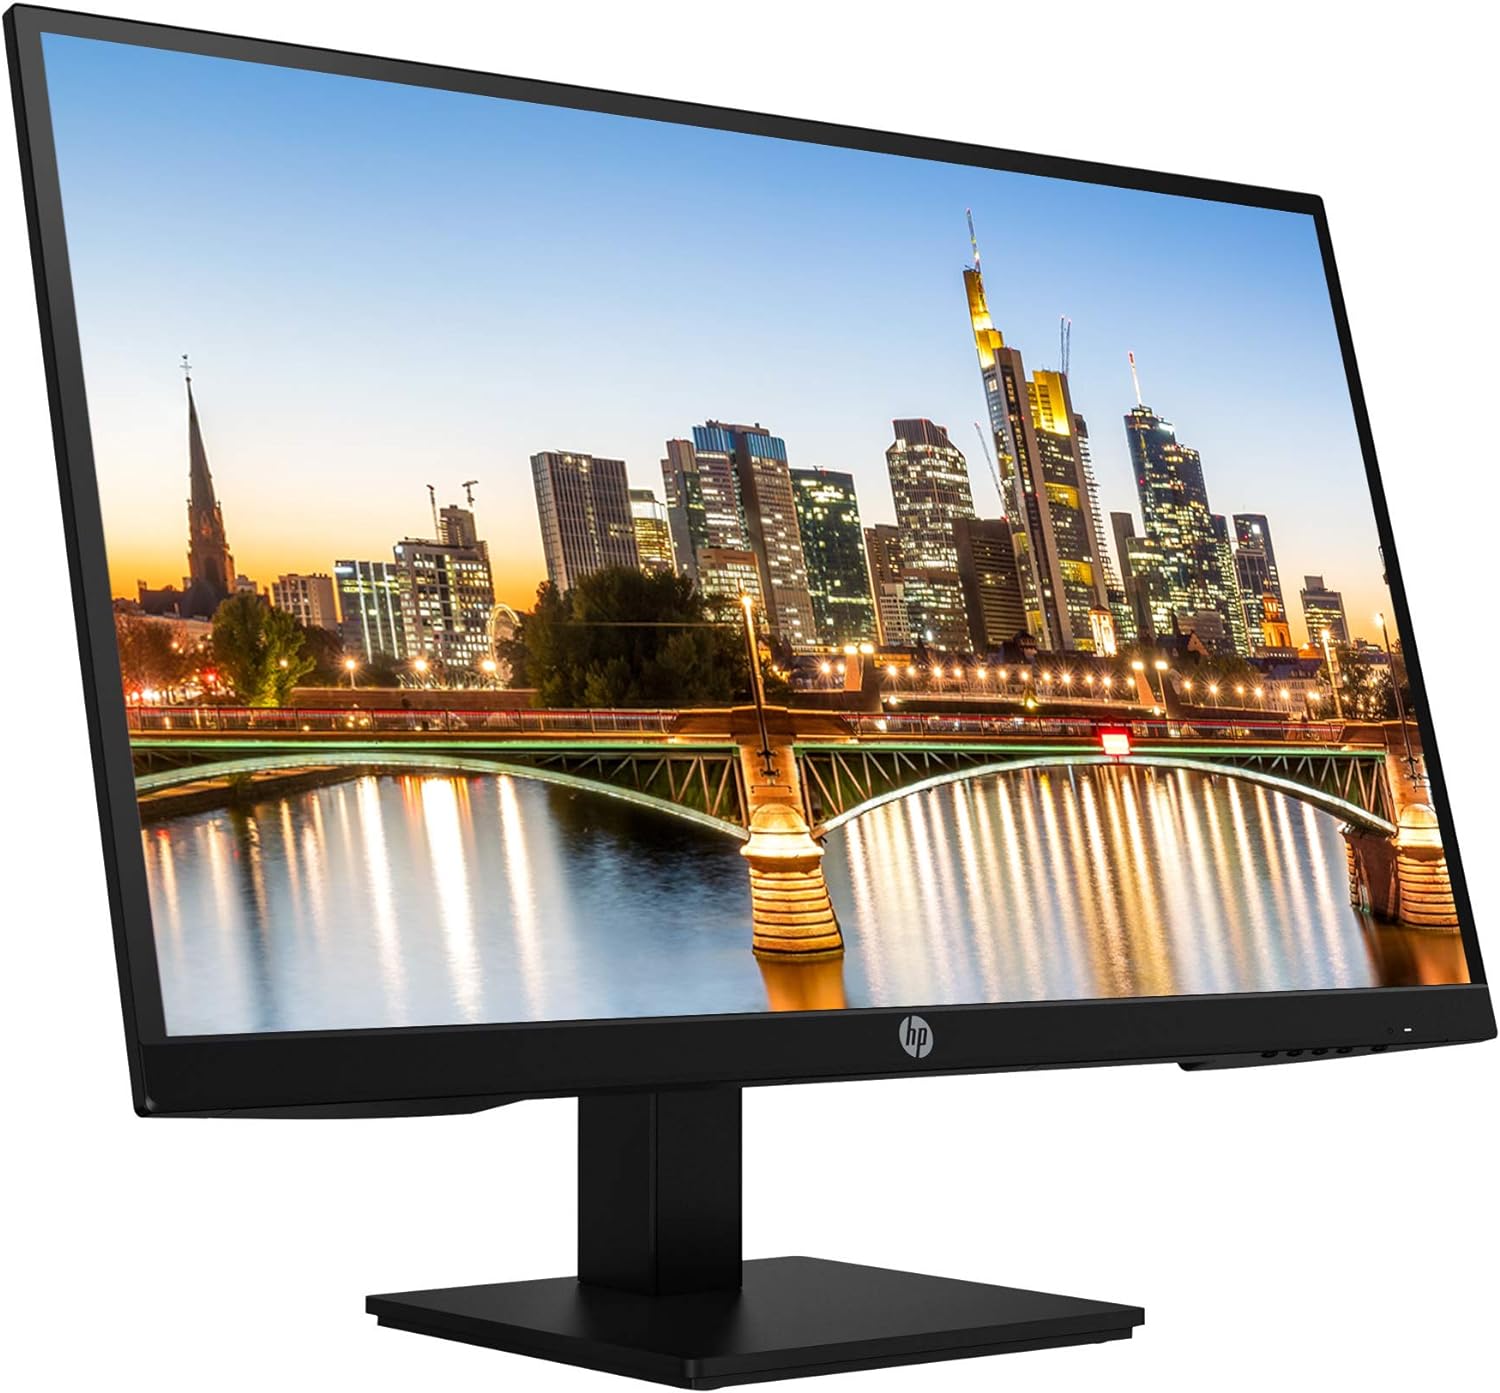 HP P27h G4 27 Inch FHD IPS LED-Backlit LCD 2-Pack Monitor Bundle with HDMI, Integrated Speakers, Blue Light Filter, Dual Monitor Stand, MK270 Wireless Keyboard and Mouse, Gel Pad